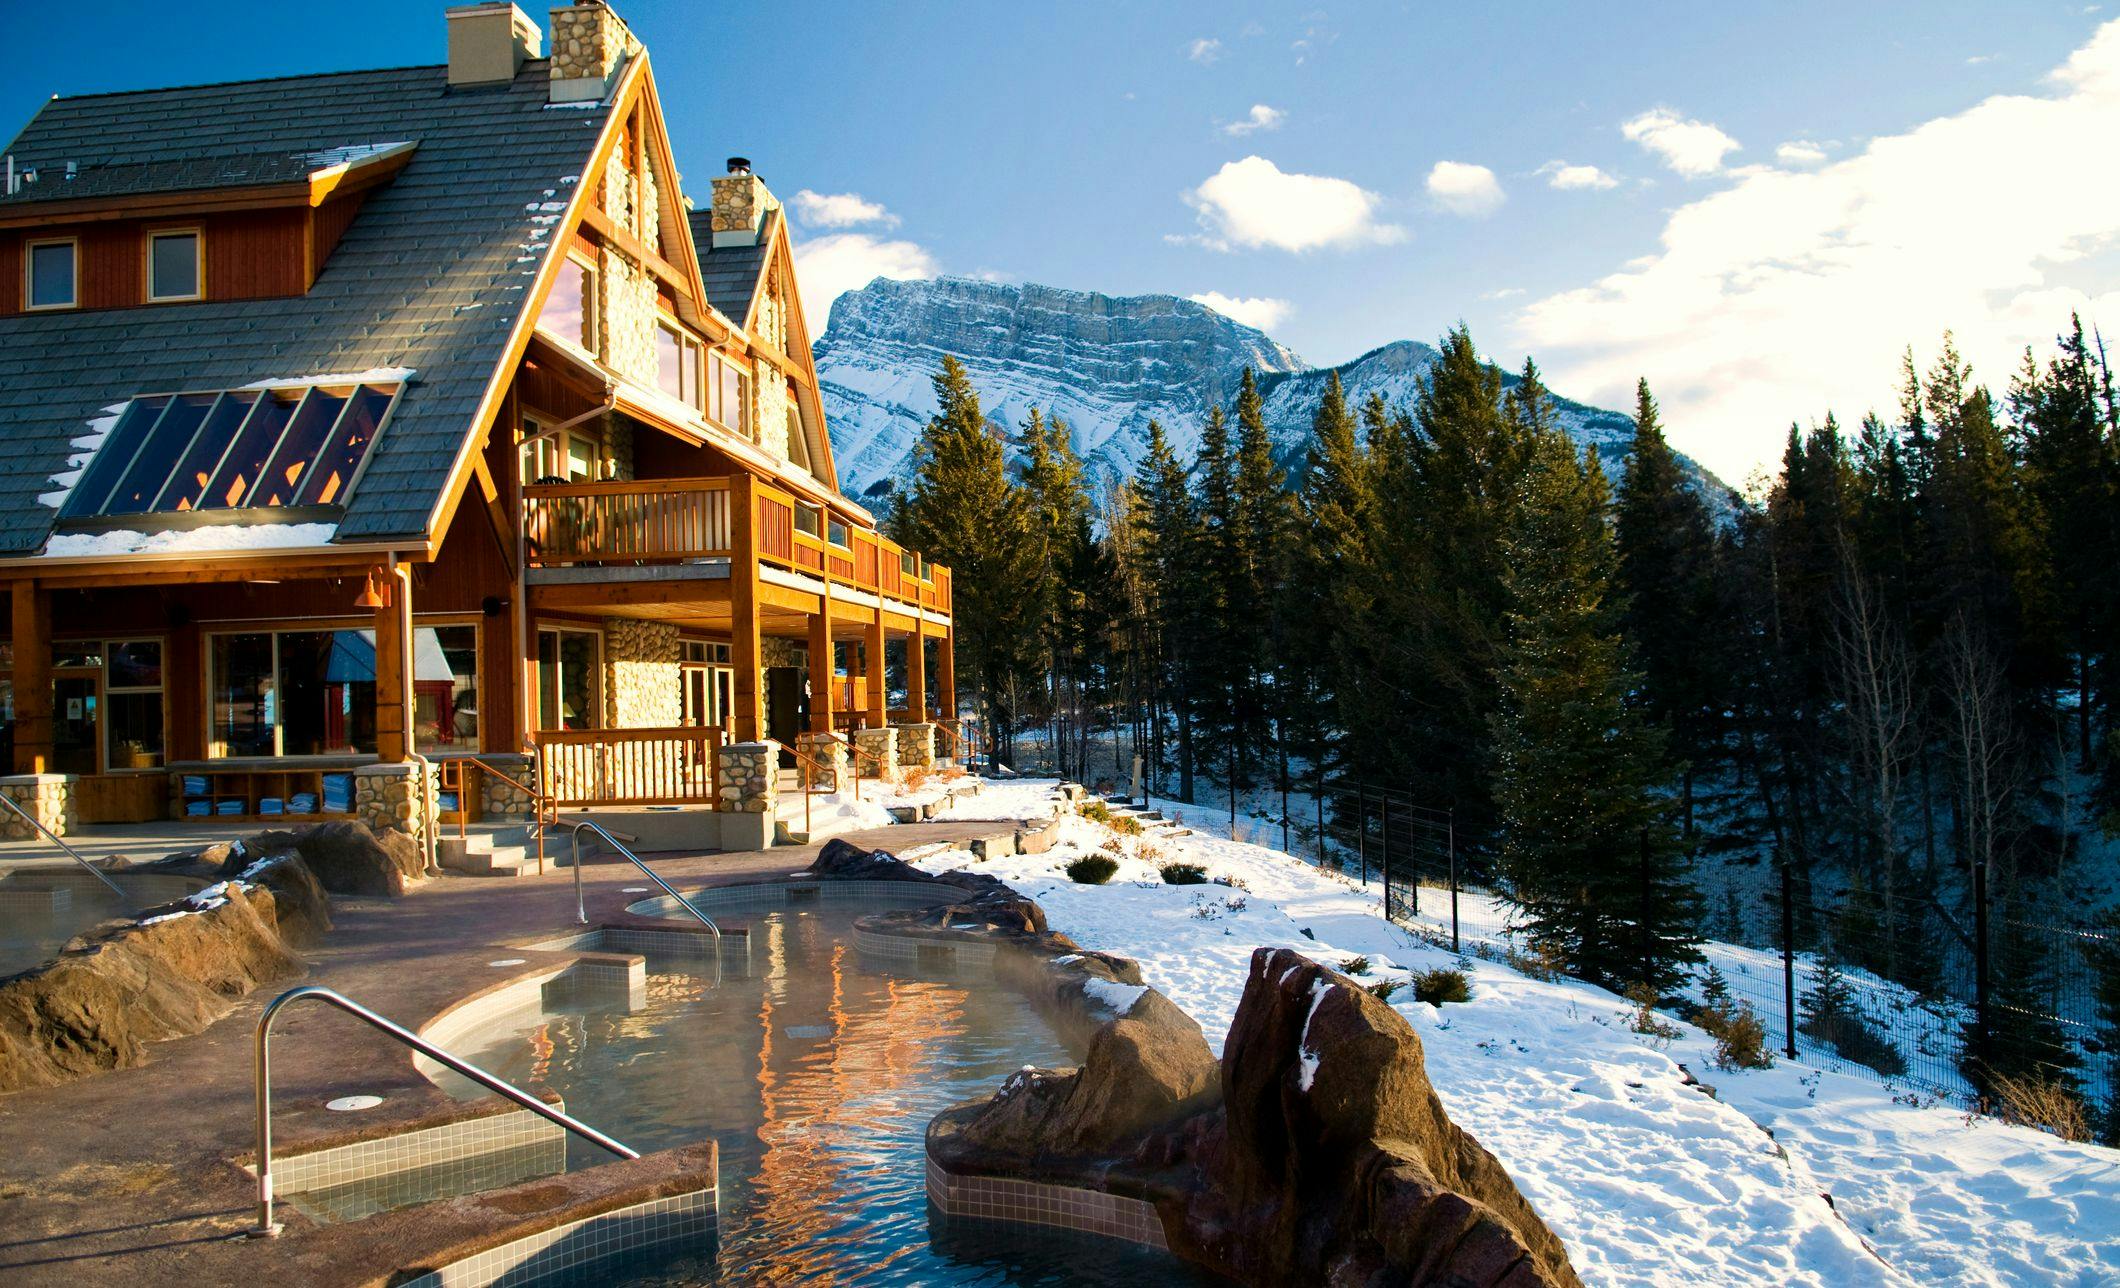 Outdoor Hot Pools with a Wooden Lodge in the Background and Mountains with Snow